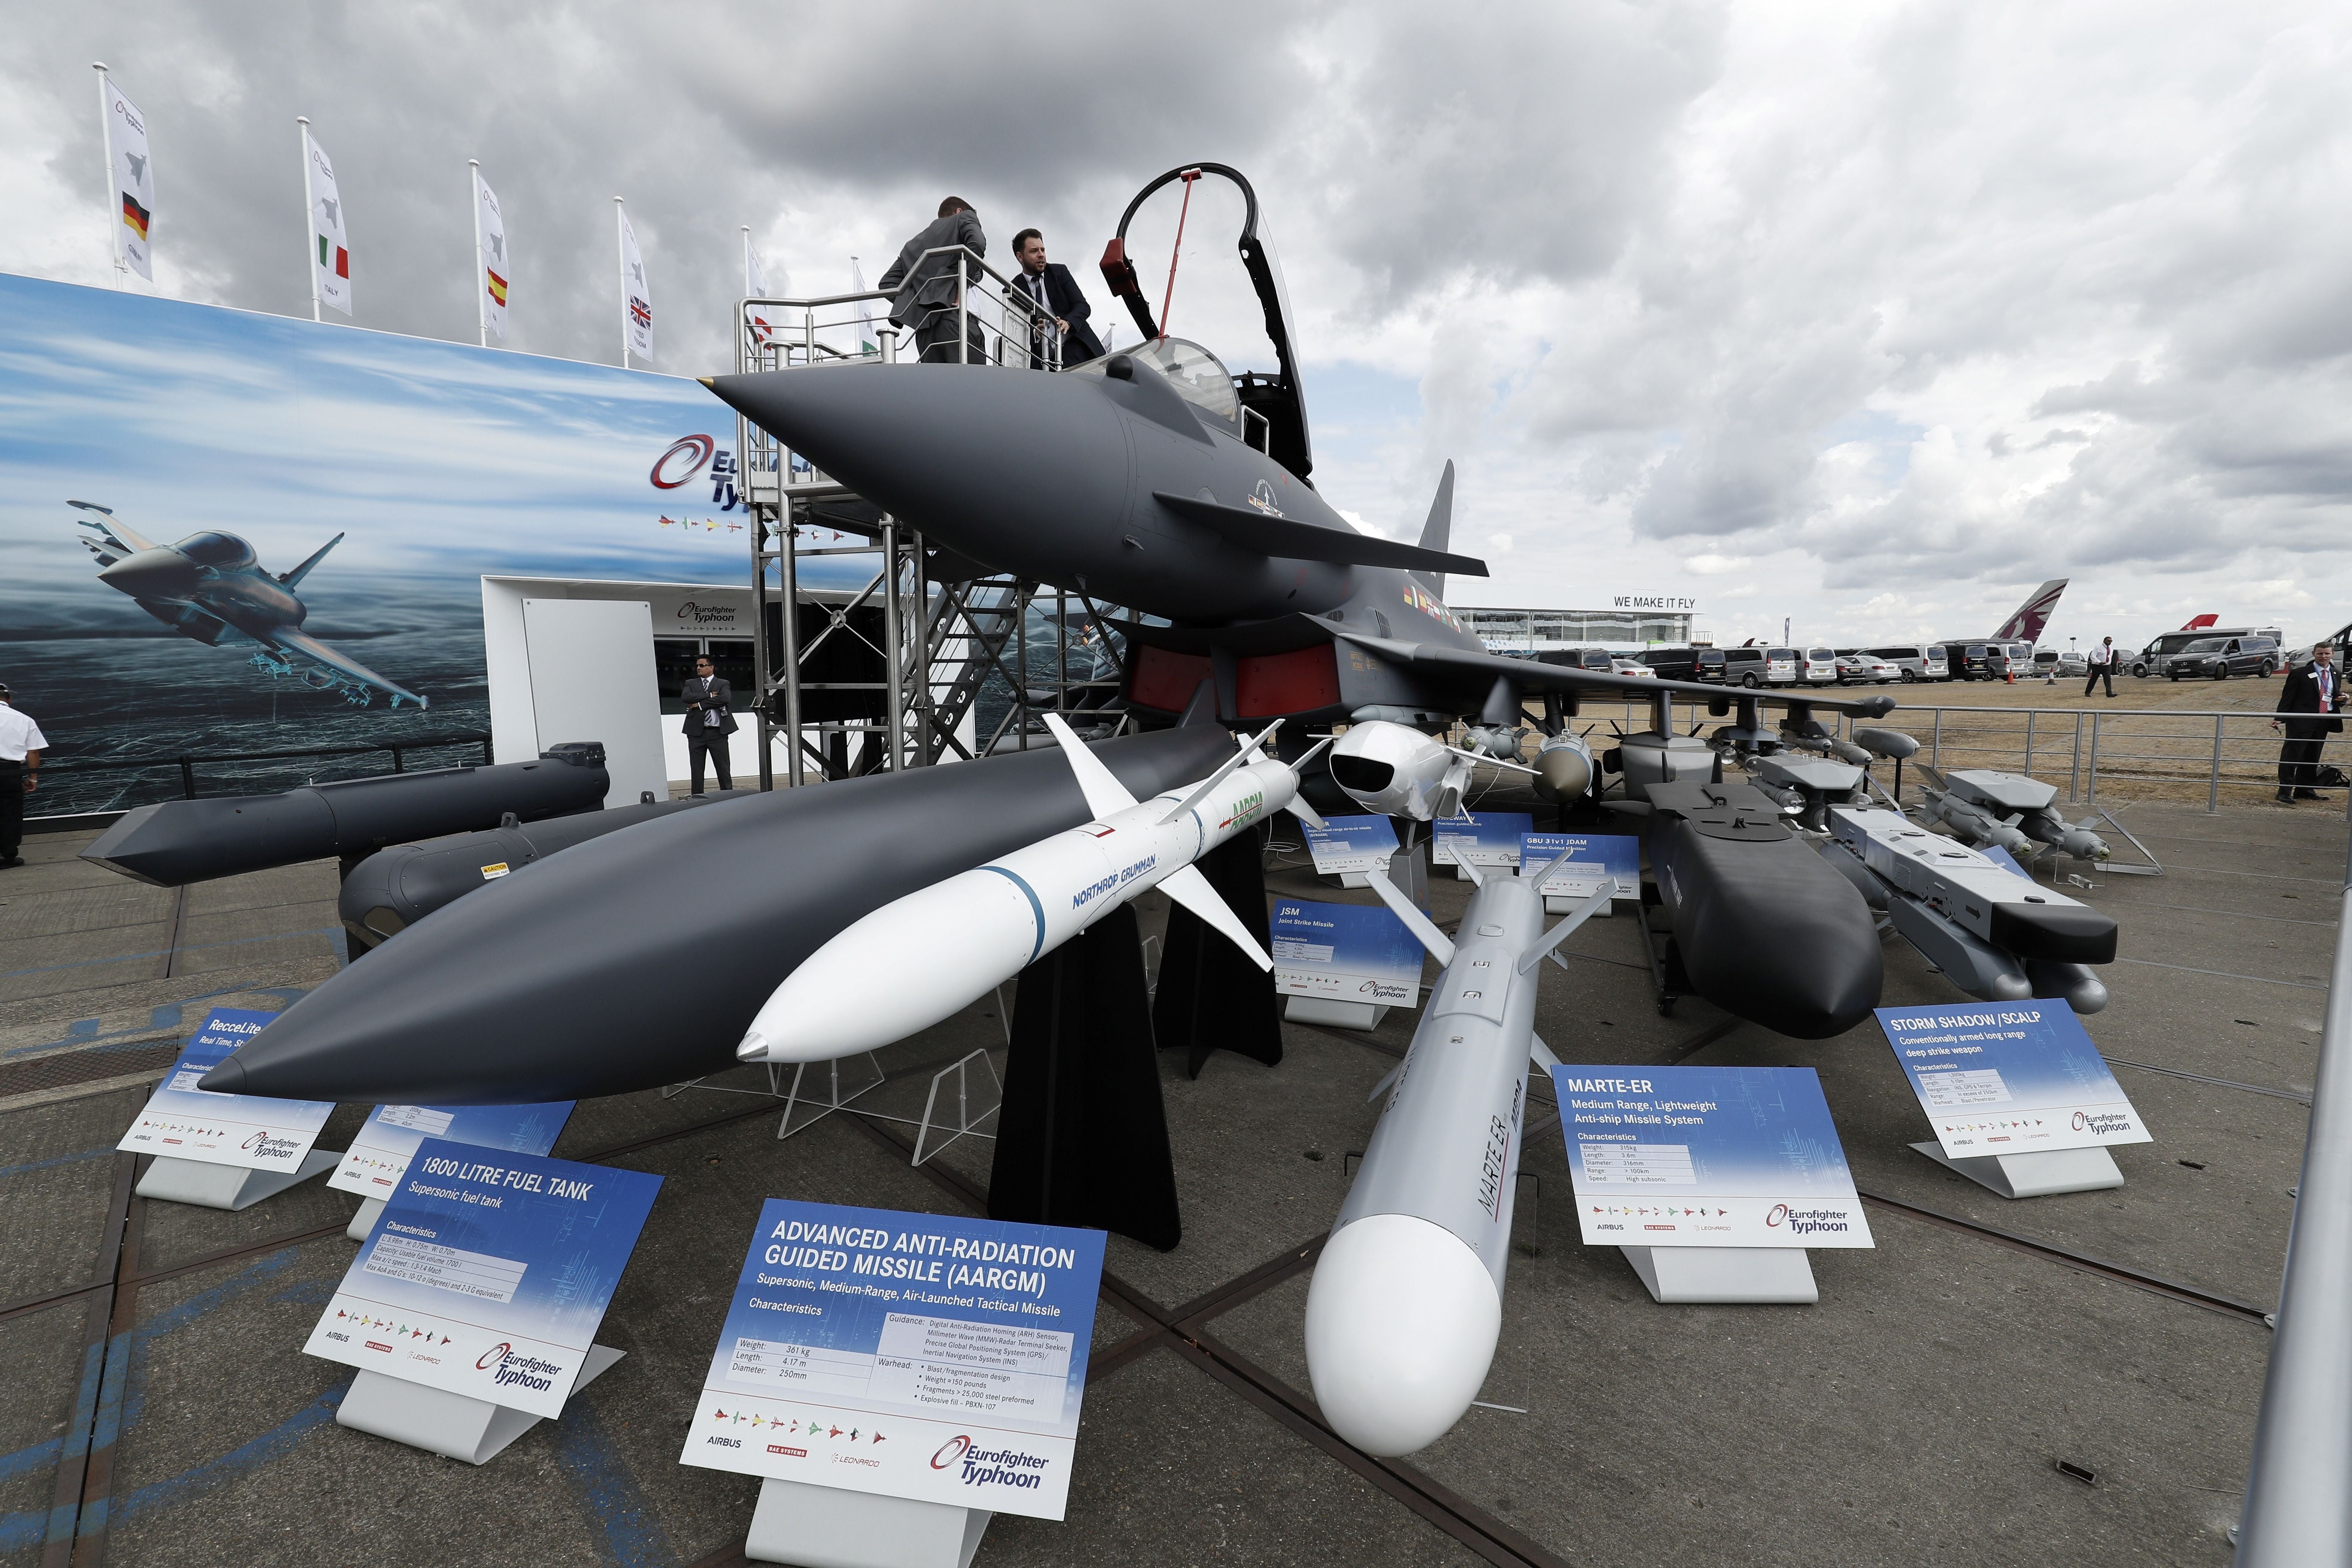 BAE Systems exhibits a Eurofighter Typhoon aircraft at the 2018 Farnborough Airshow, southwest of London